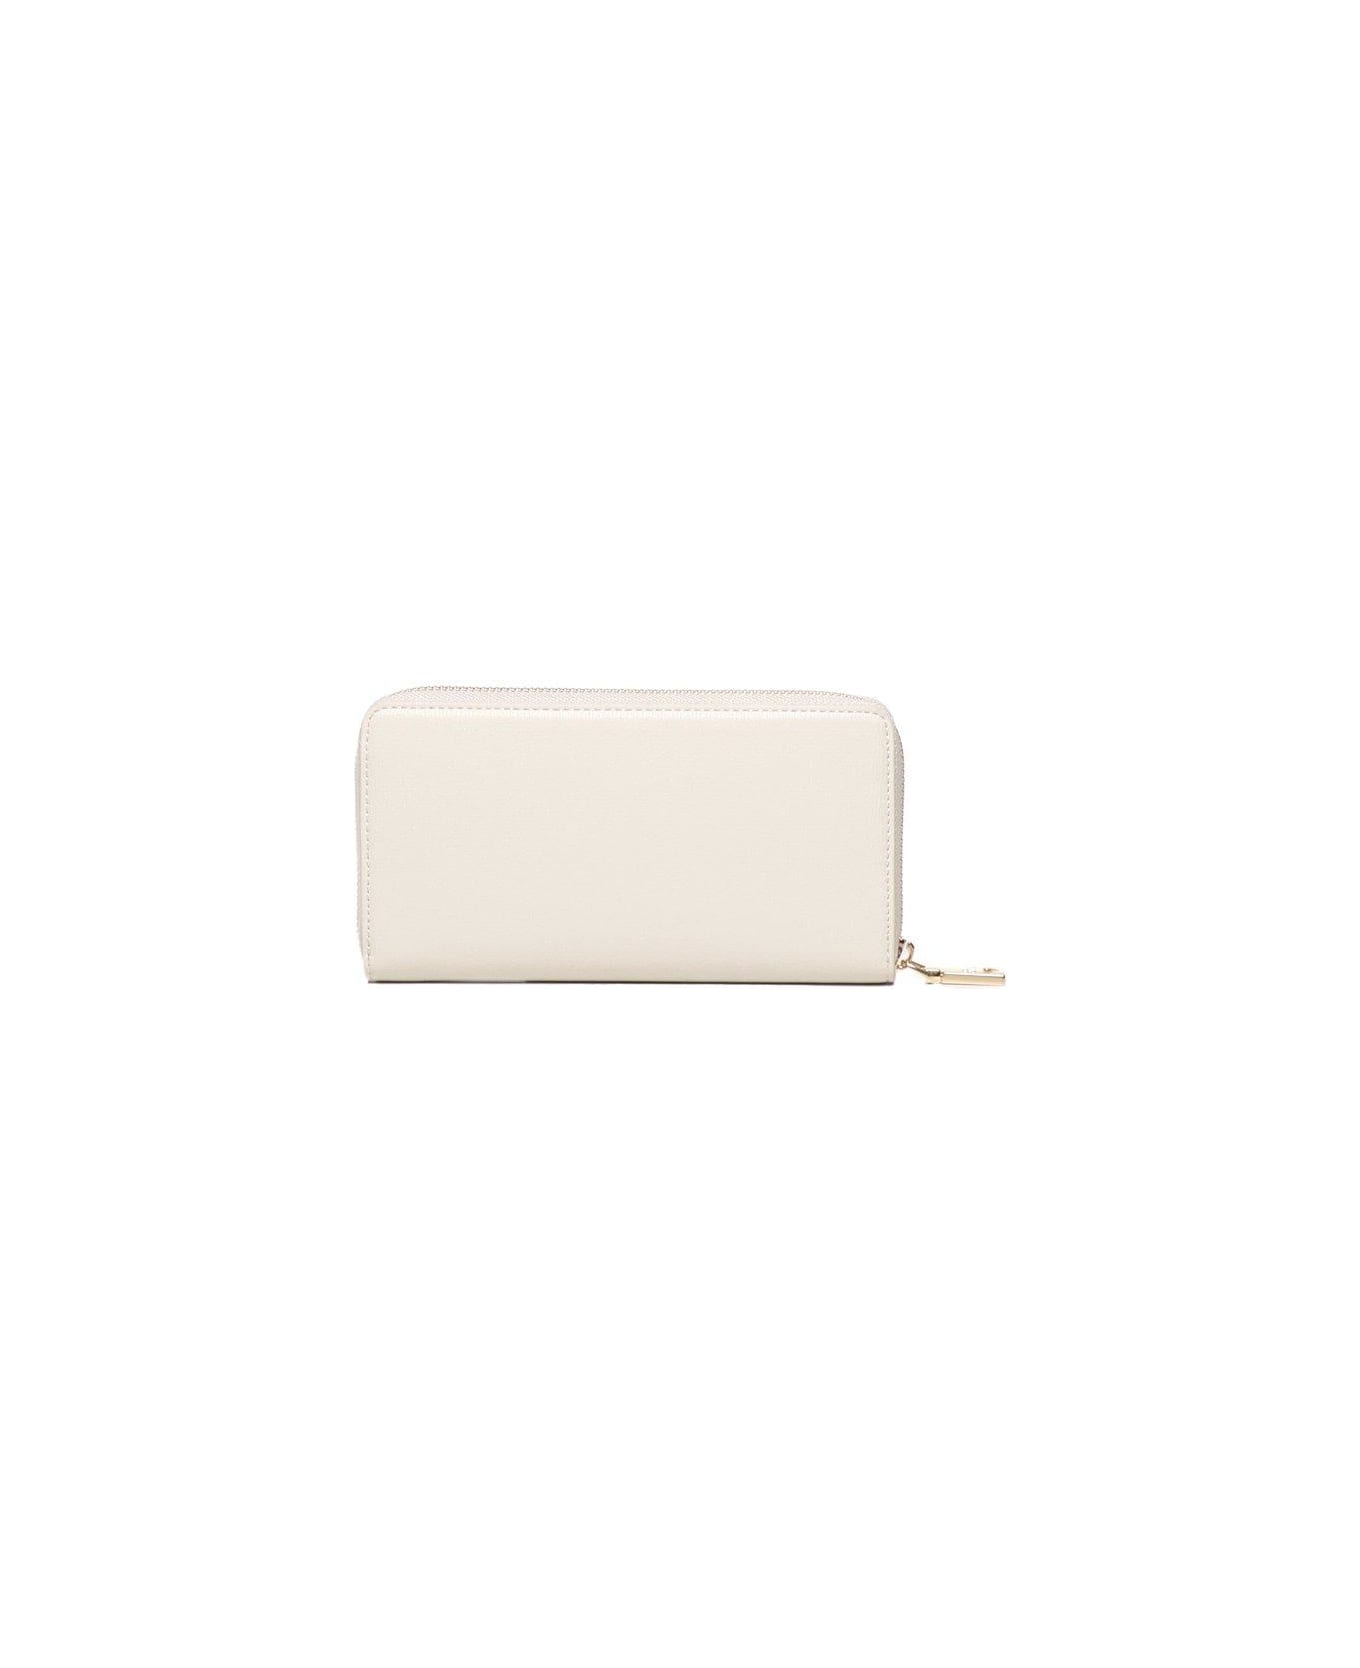 Love Moschino Logo Lettering Zipped Wallet - Ivory